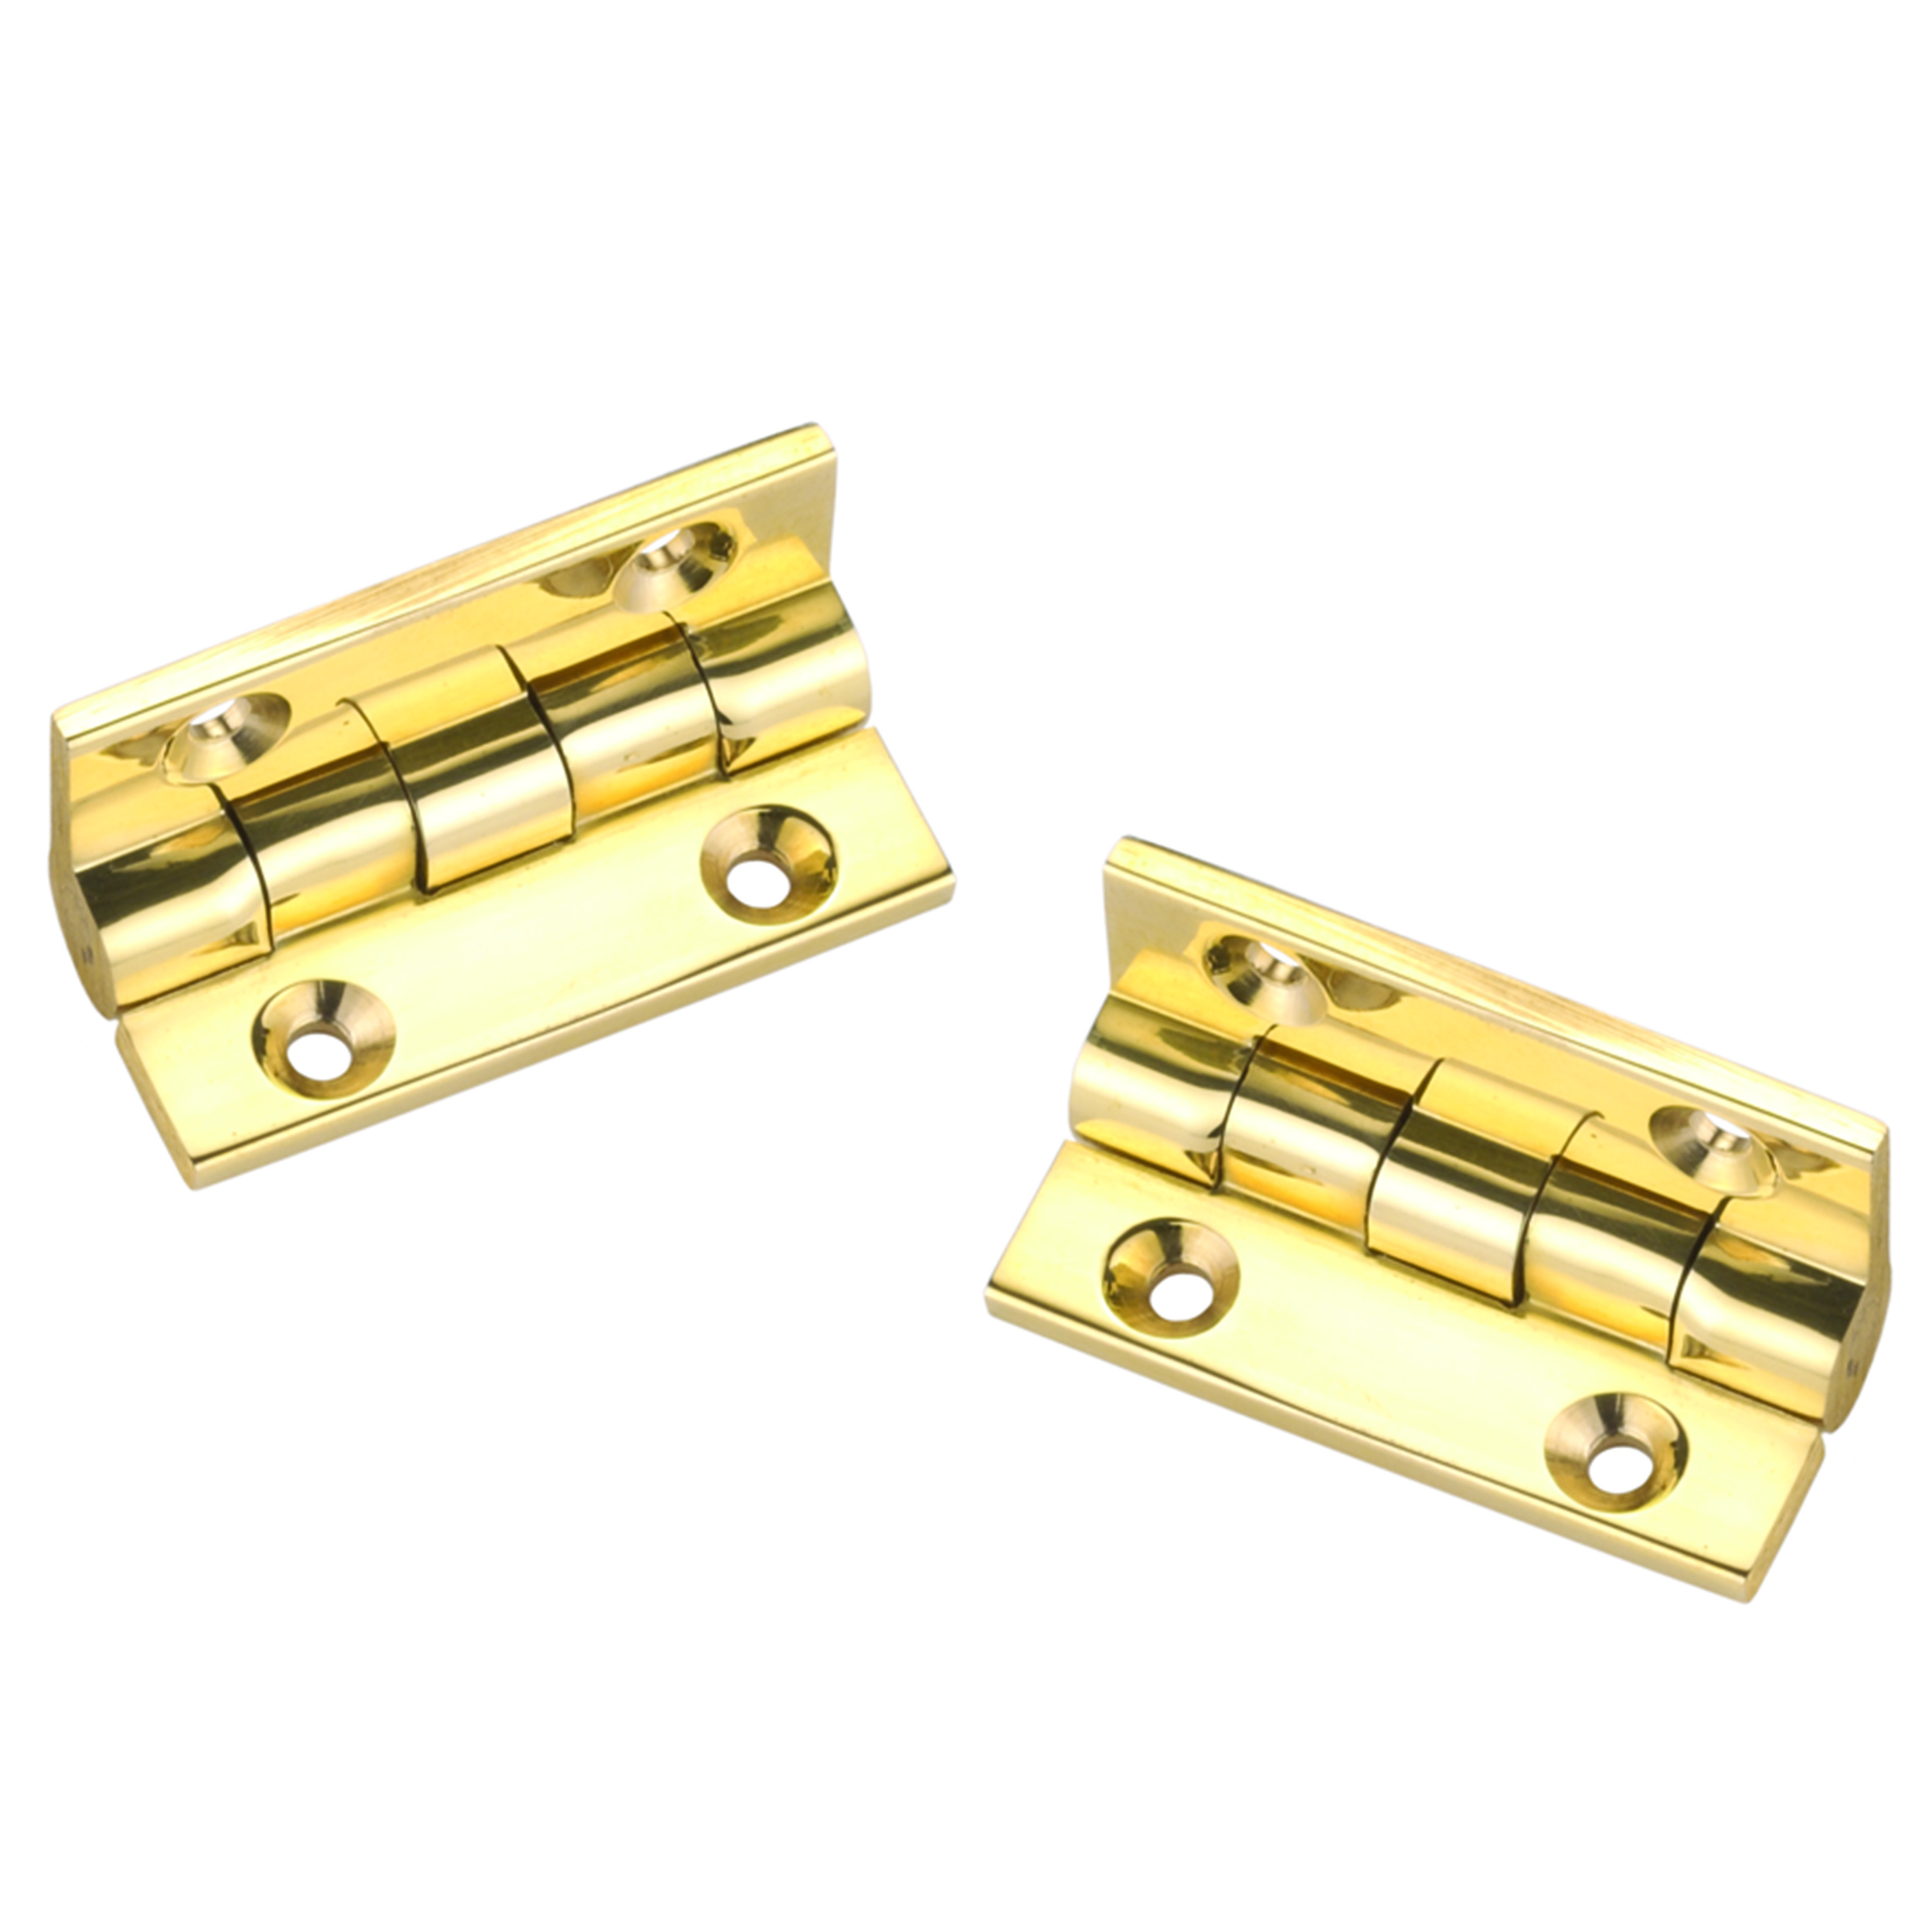 Stop Hinge, Polished Brass 1-1/2" X 1-1/8", Pair